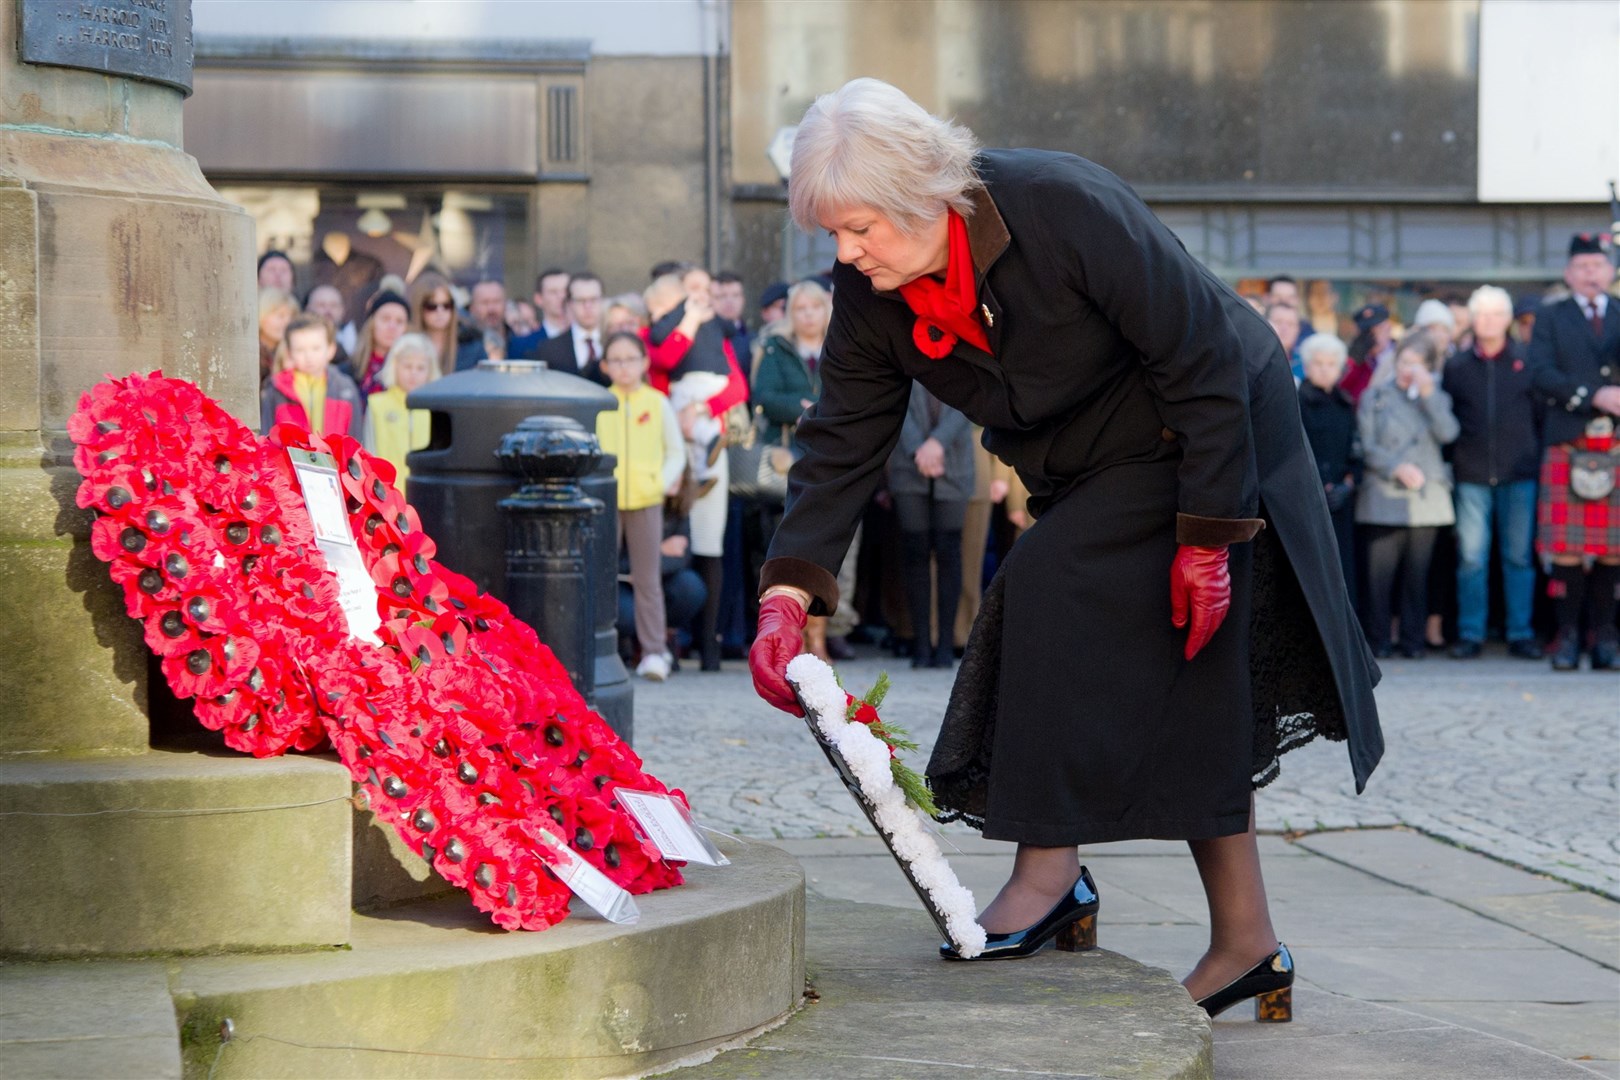 Maureen Jarvis lays a wreath on behalf of the War Widdows Association at the Elgin Memorial...2018 Elgin Remembrance Sunday parade and wreath laying. ..Picture: Daniel Forsyth. Image No.042559.